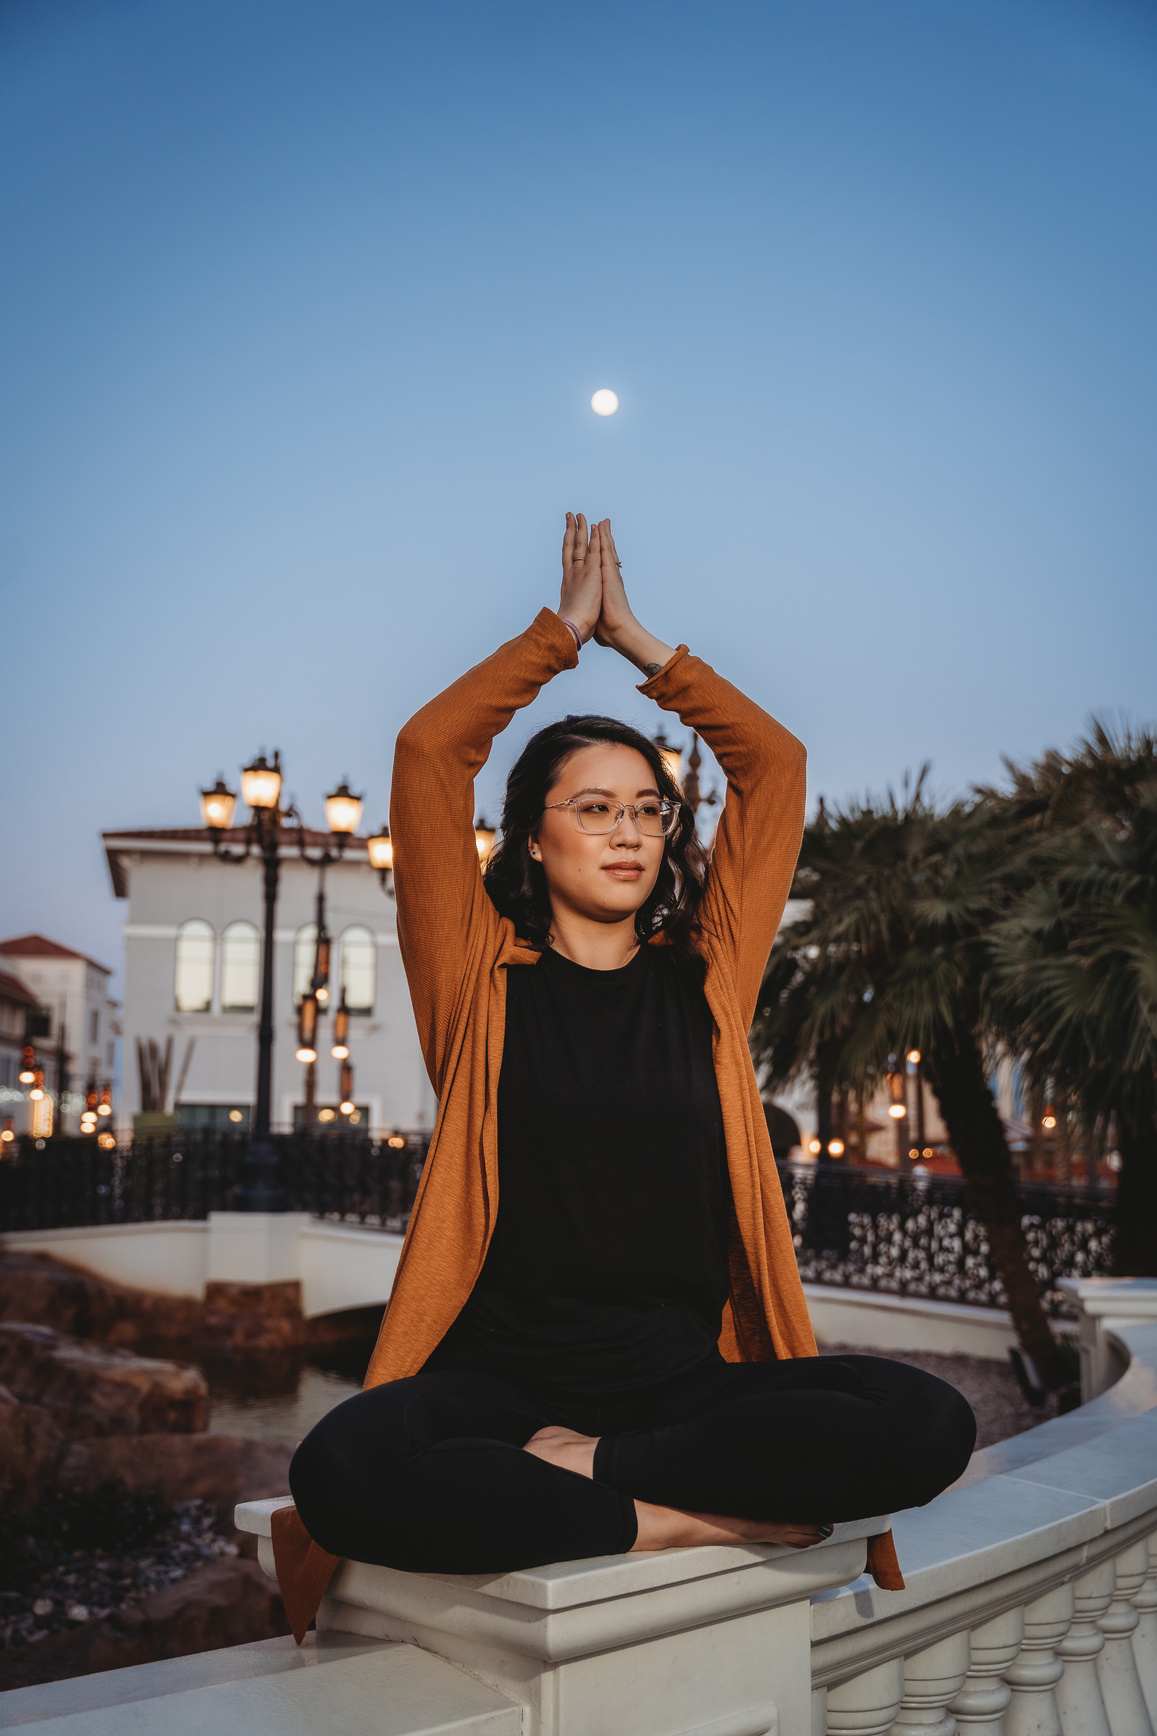 a wellness coach doing healing yoga in front of a building with the moon in the background.